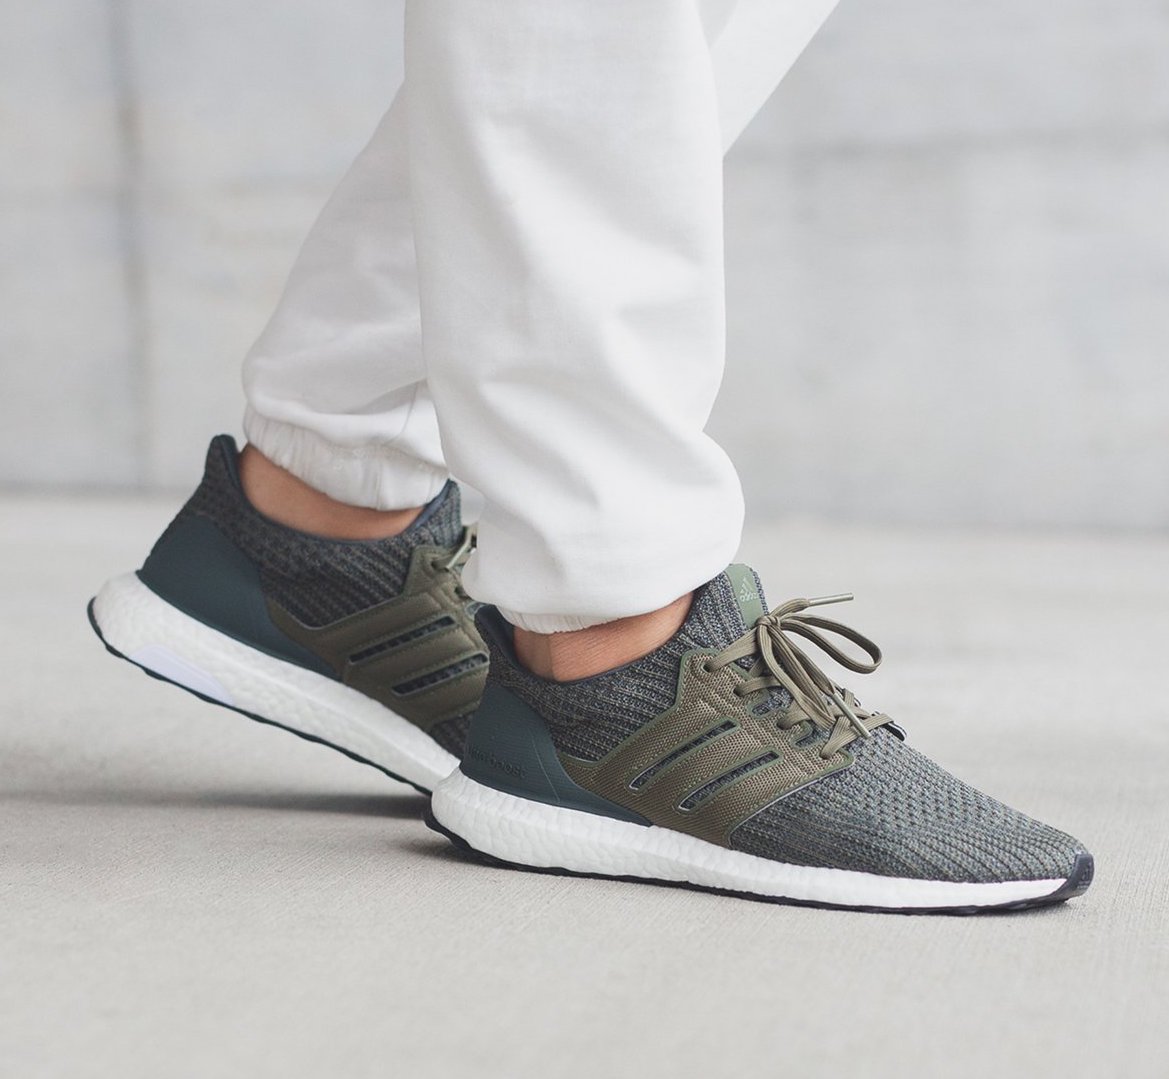 Now Available: adidas UltraBOOST 4.0 